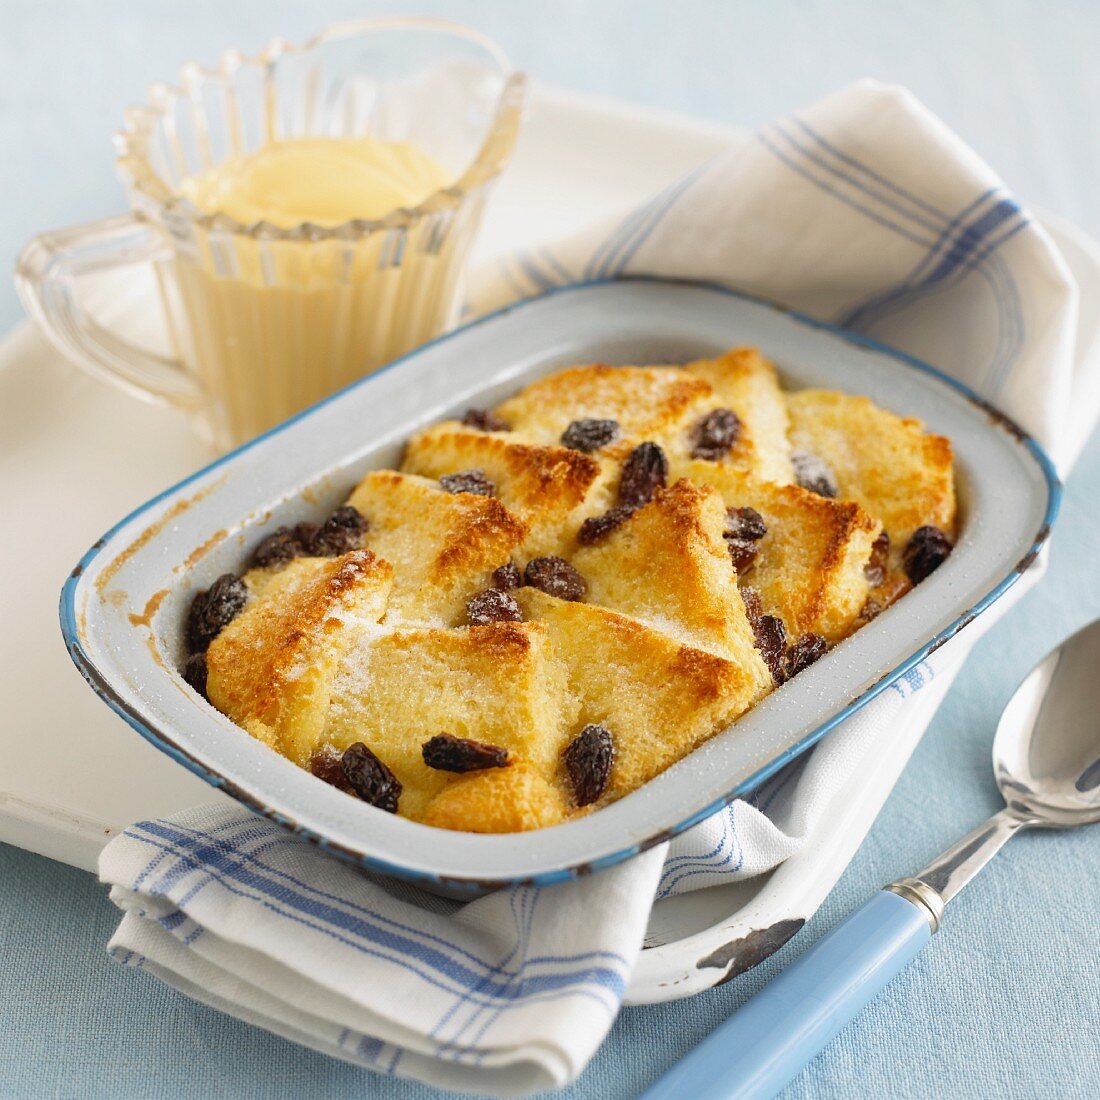 Bread And Butter Pudding (Brotpudding, England)